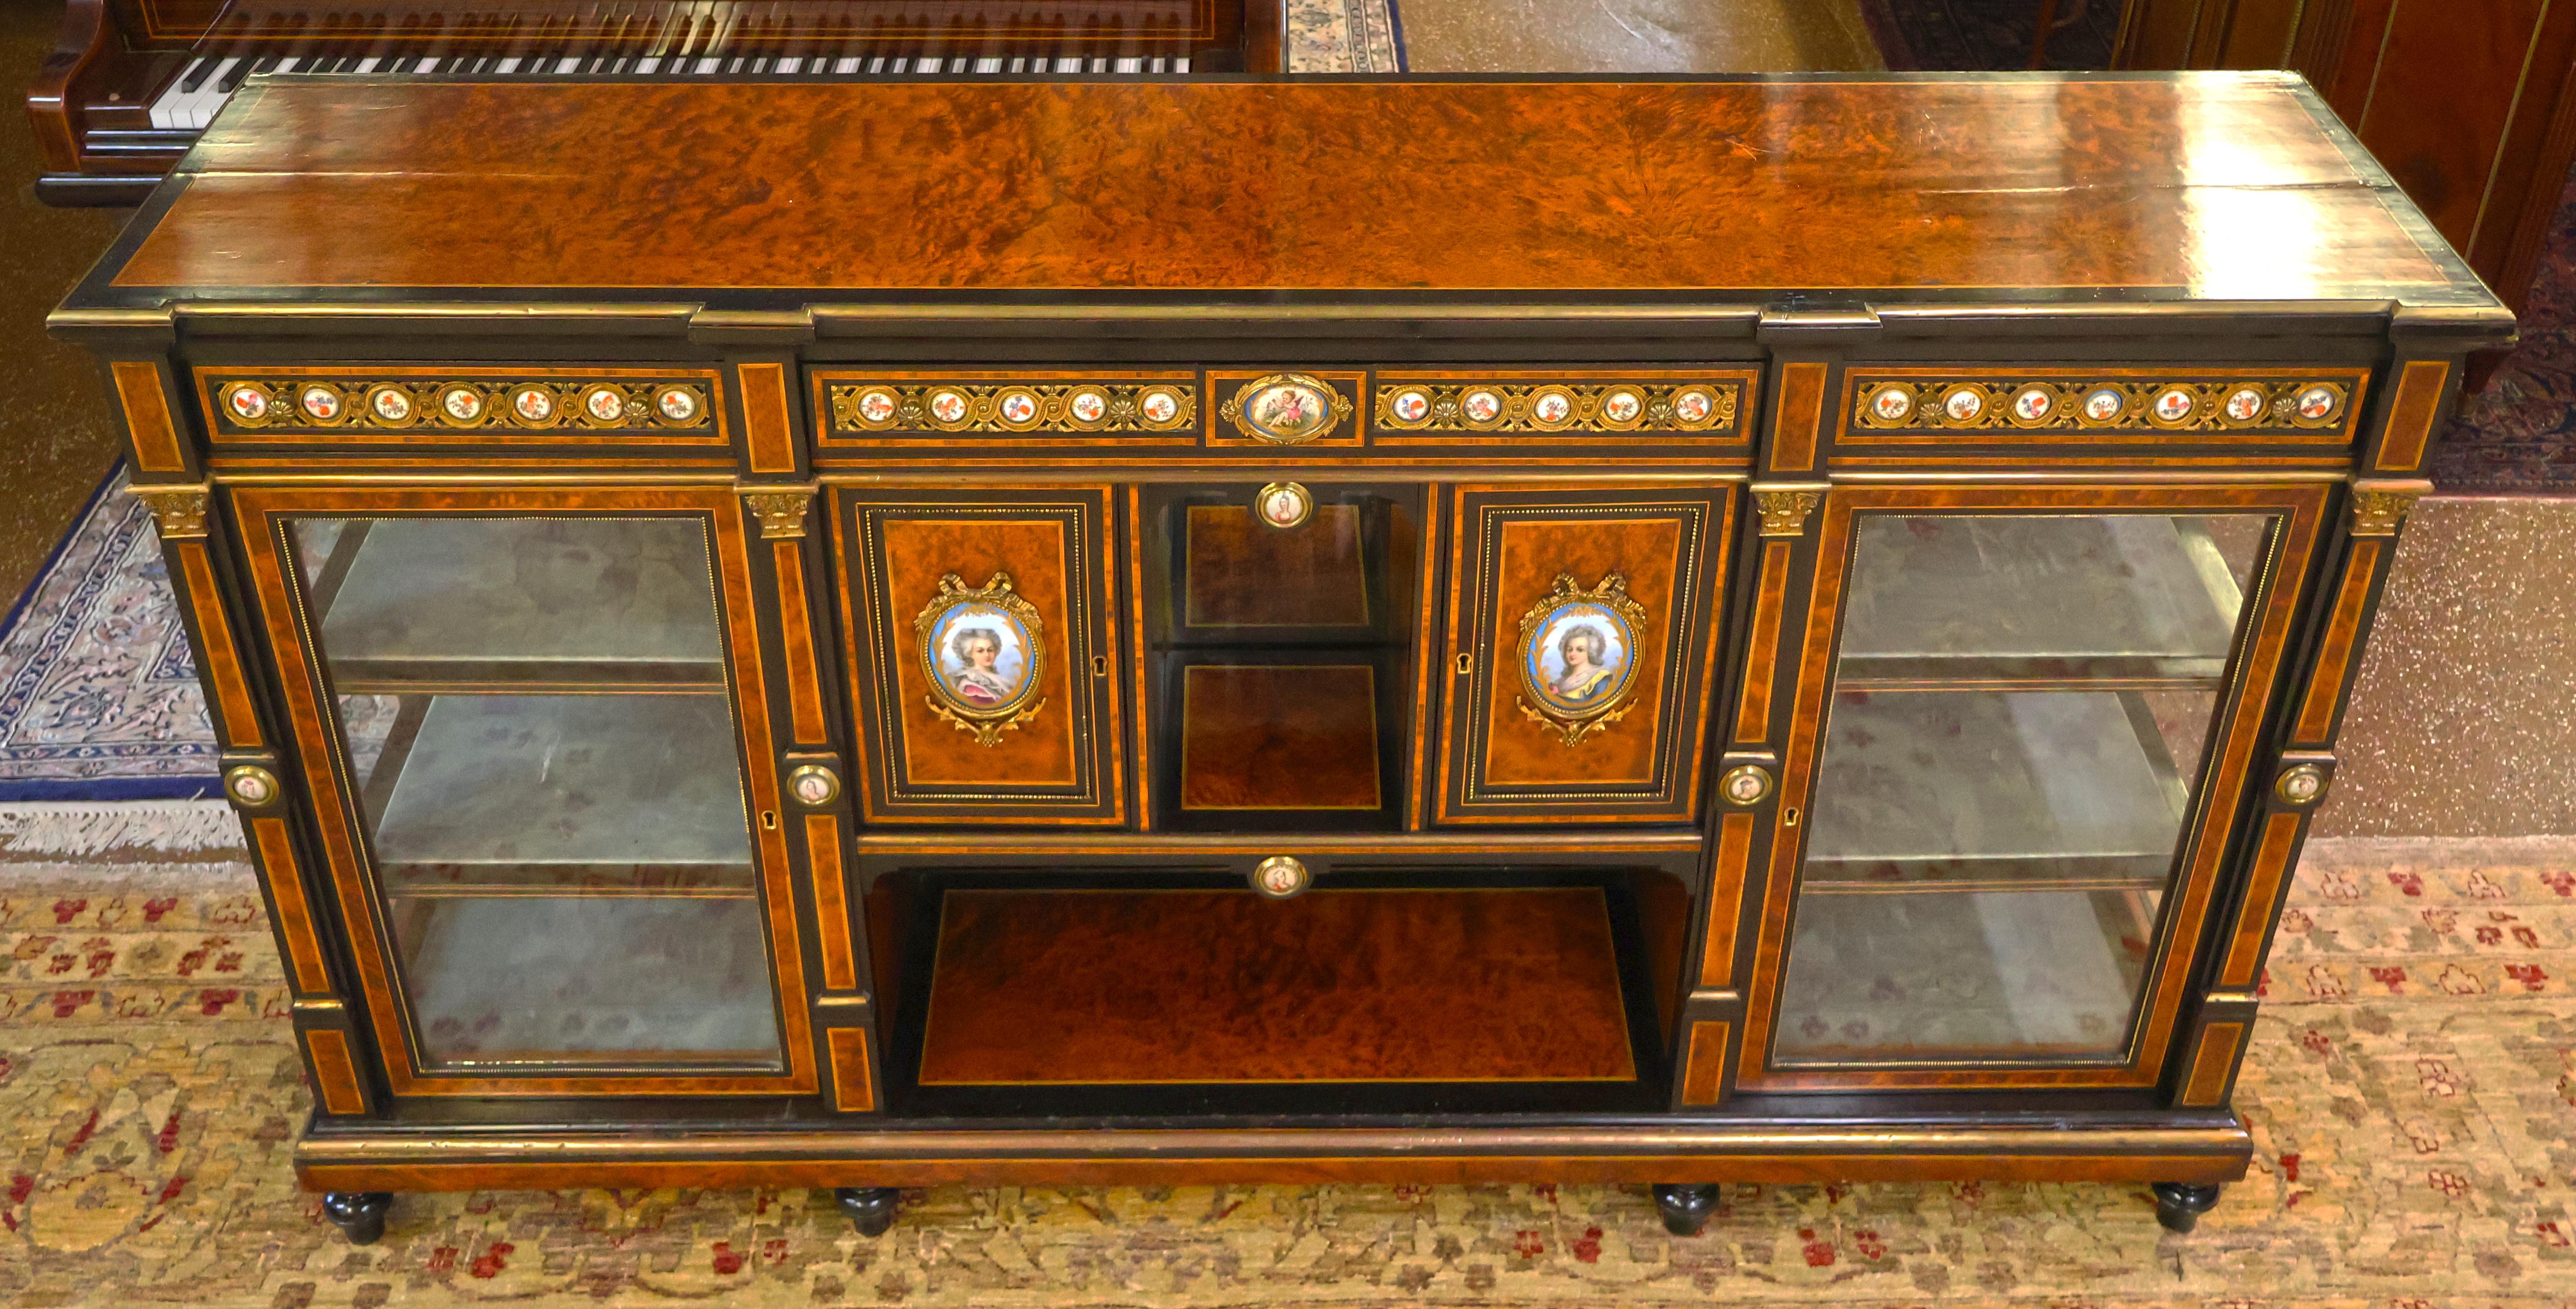 ​19th Century Napoleon III Style English Inlaid Porcelain Credenza Sideboard

Dimensions : 41